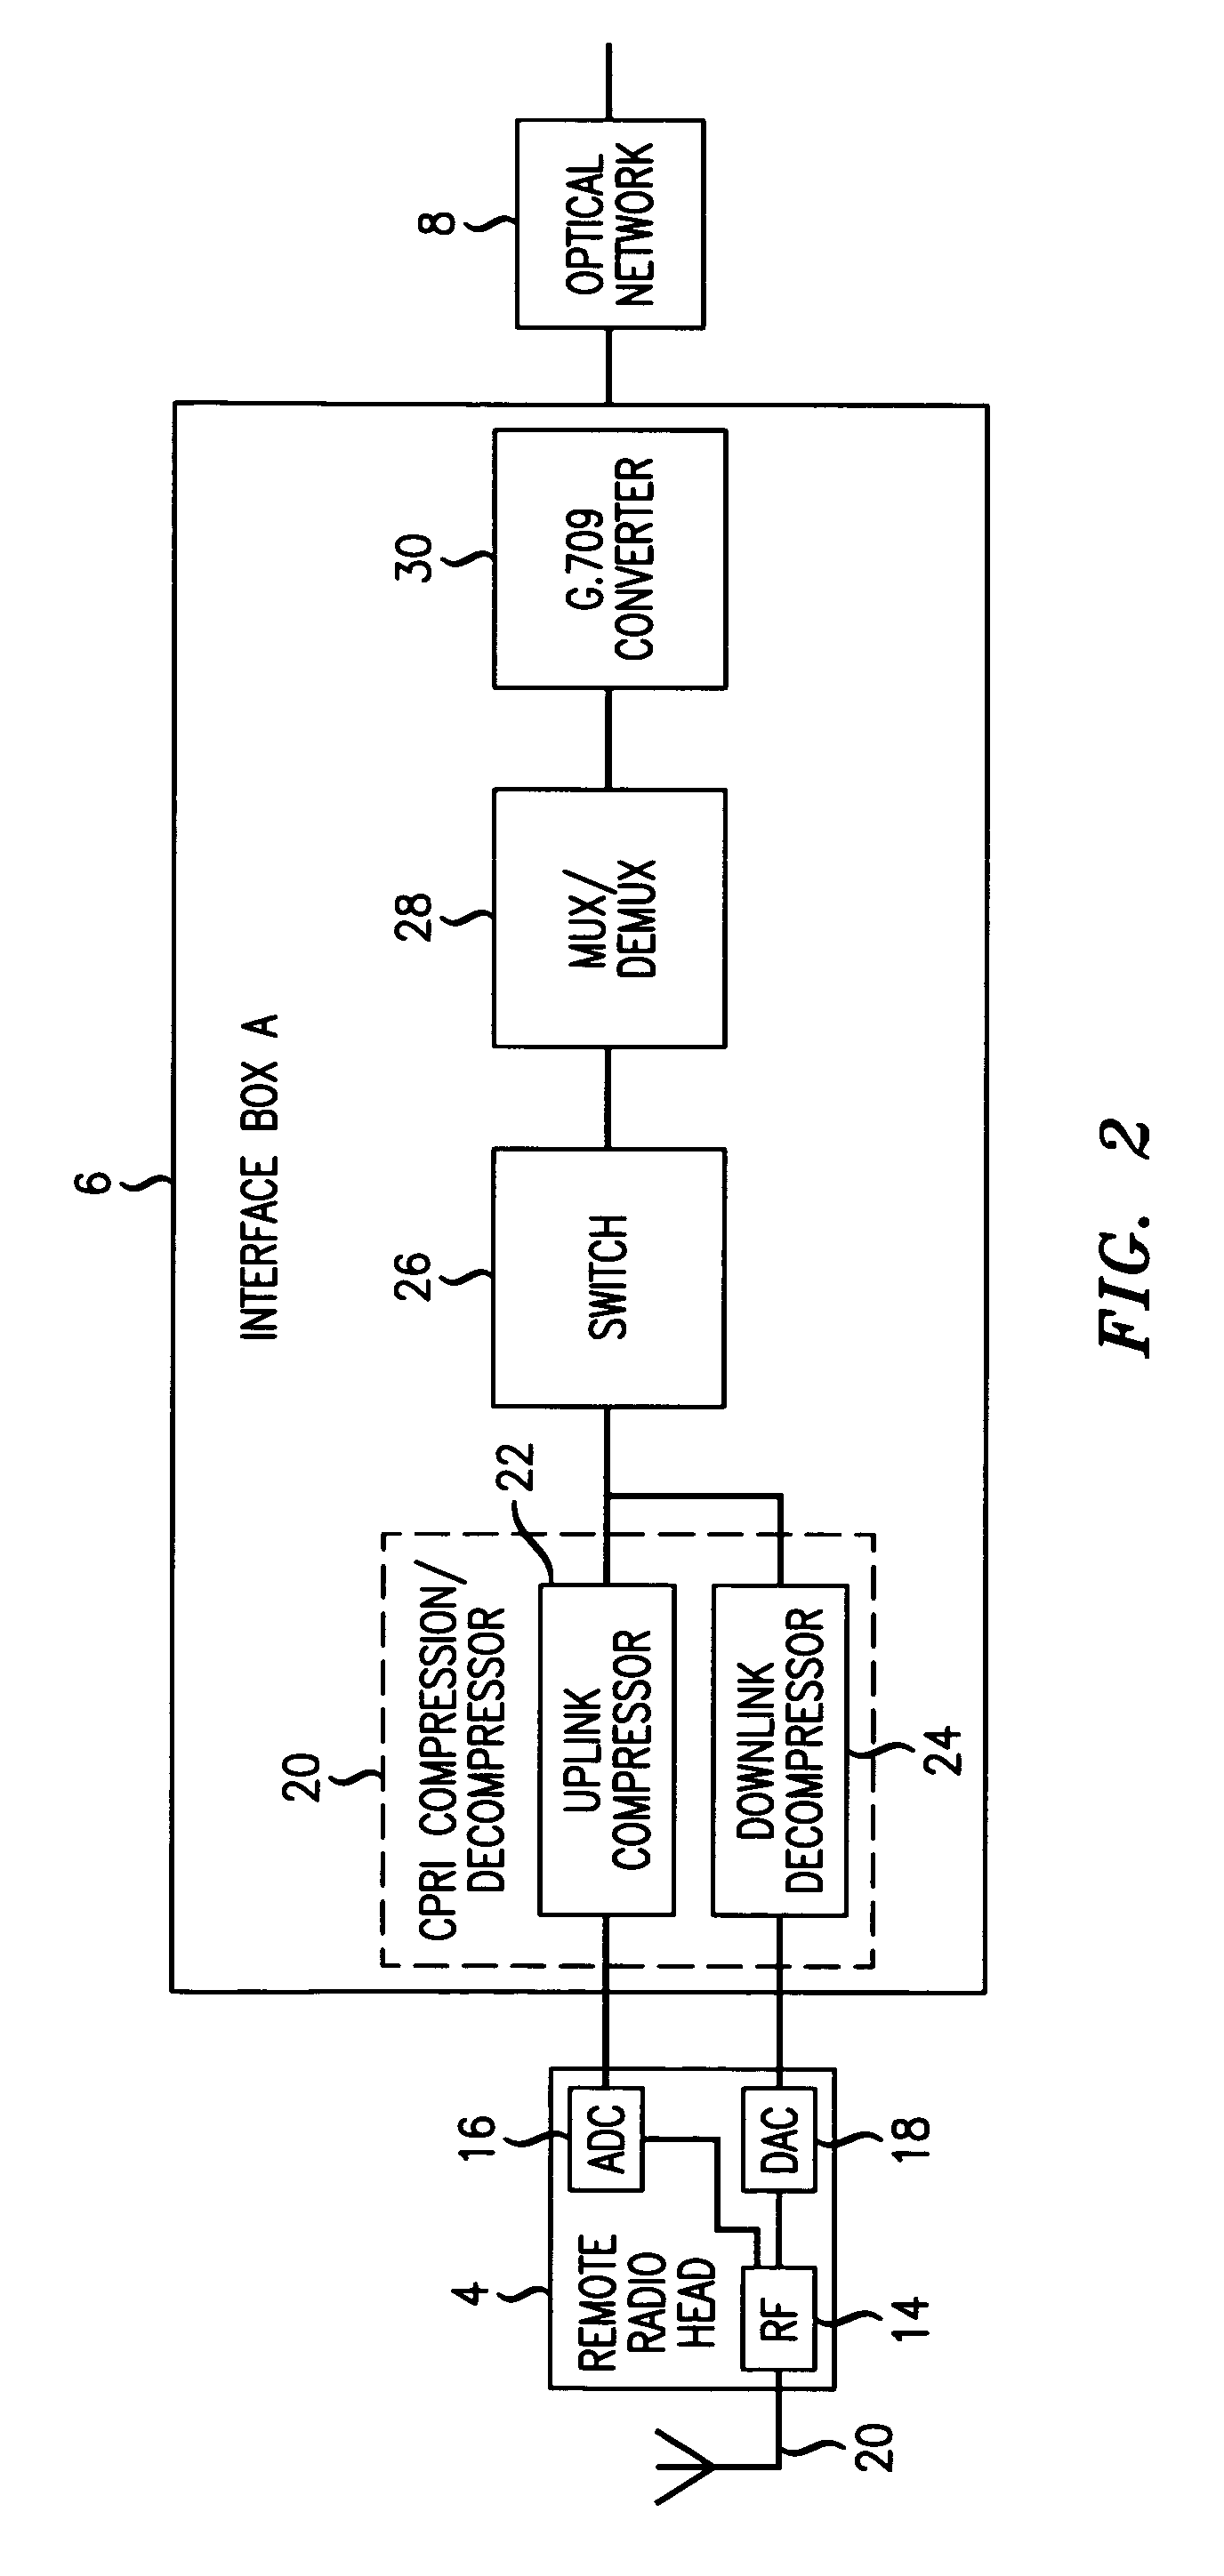 Method of processing a digital signal for transmission, a method of processing an optical data unit upon reception, and a network element for a telecommunications network